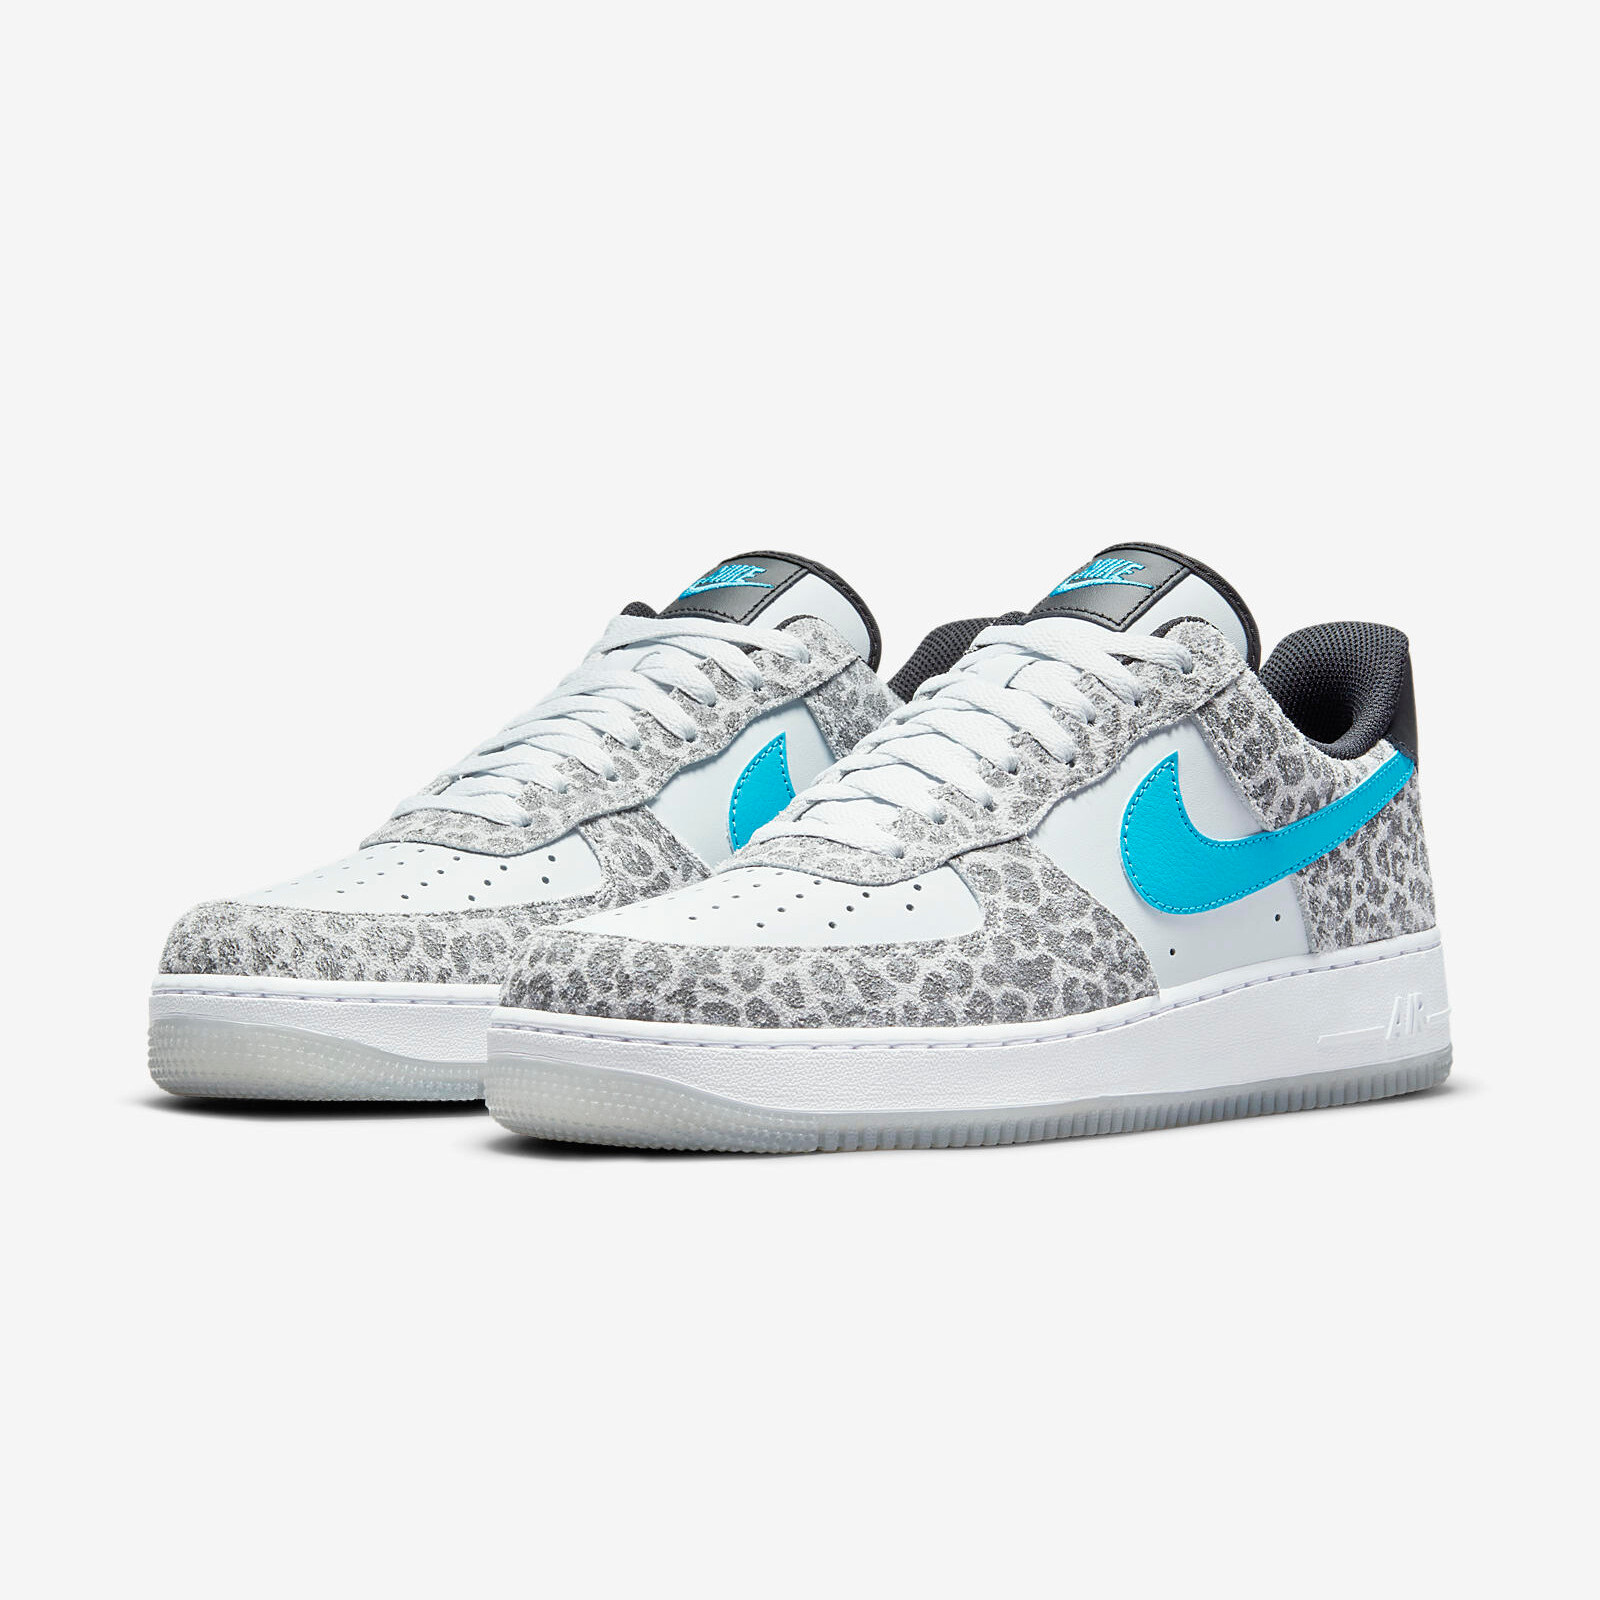 Nike Air Force 1 Low
« Leopard »